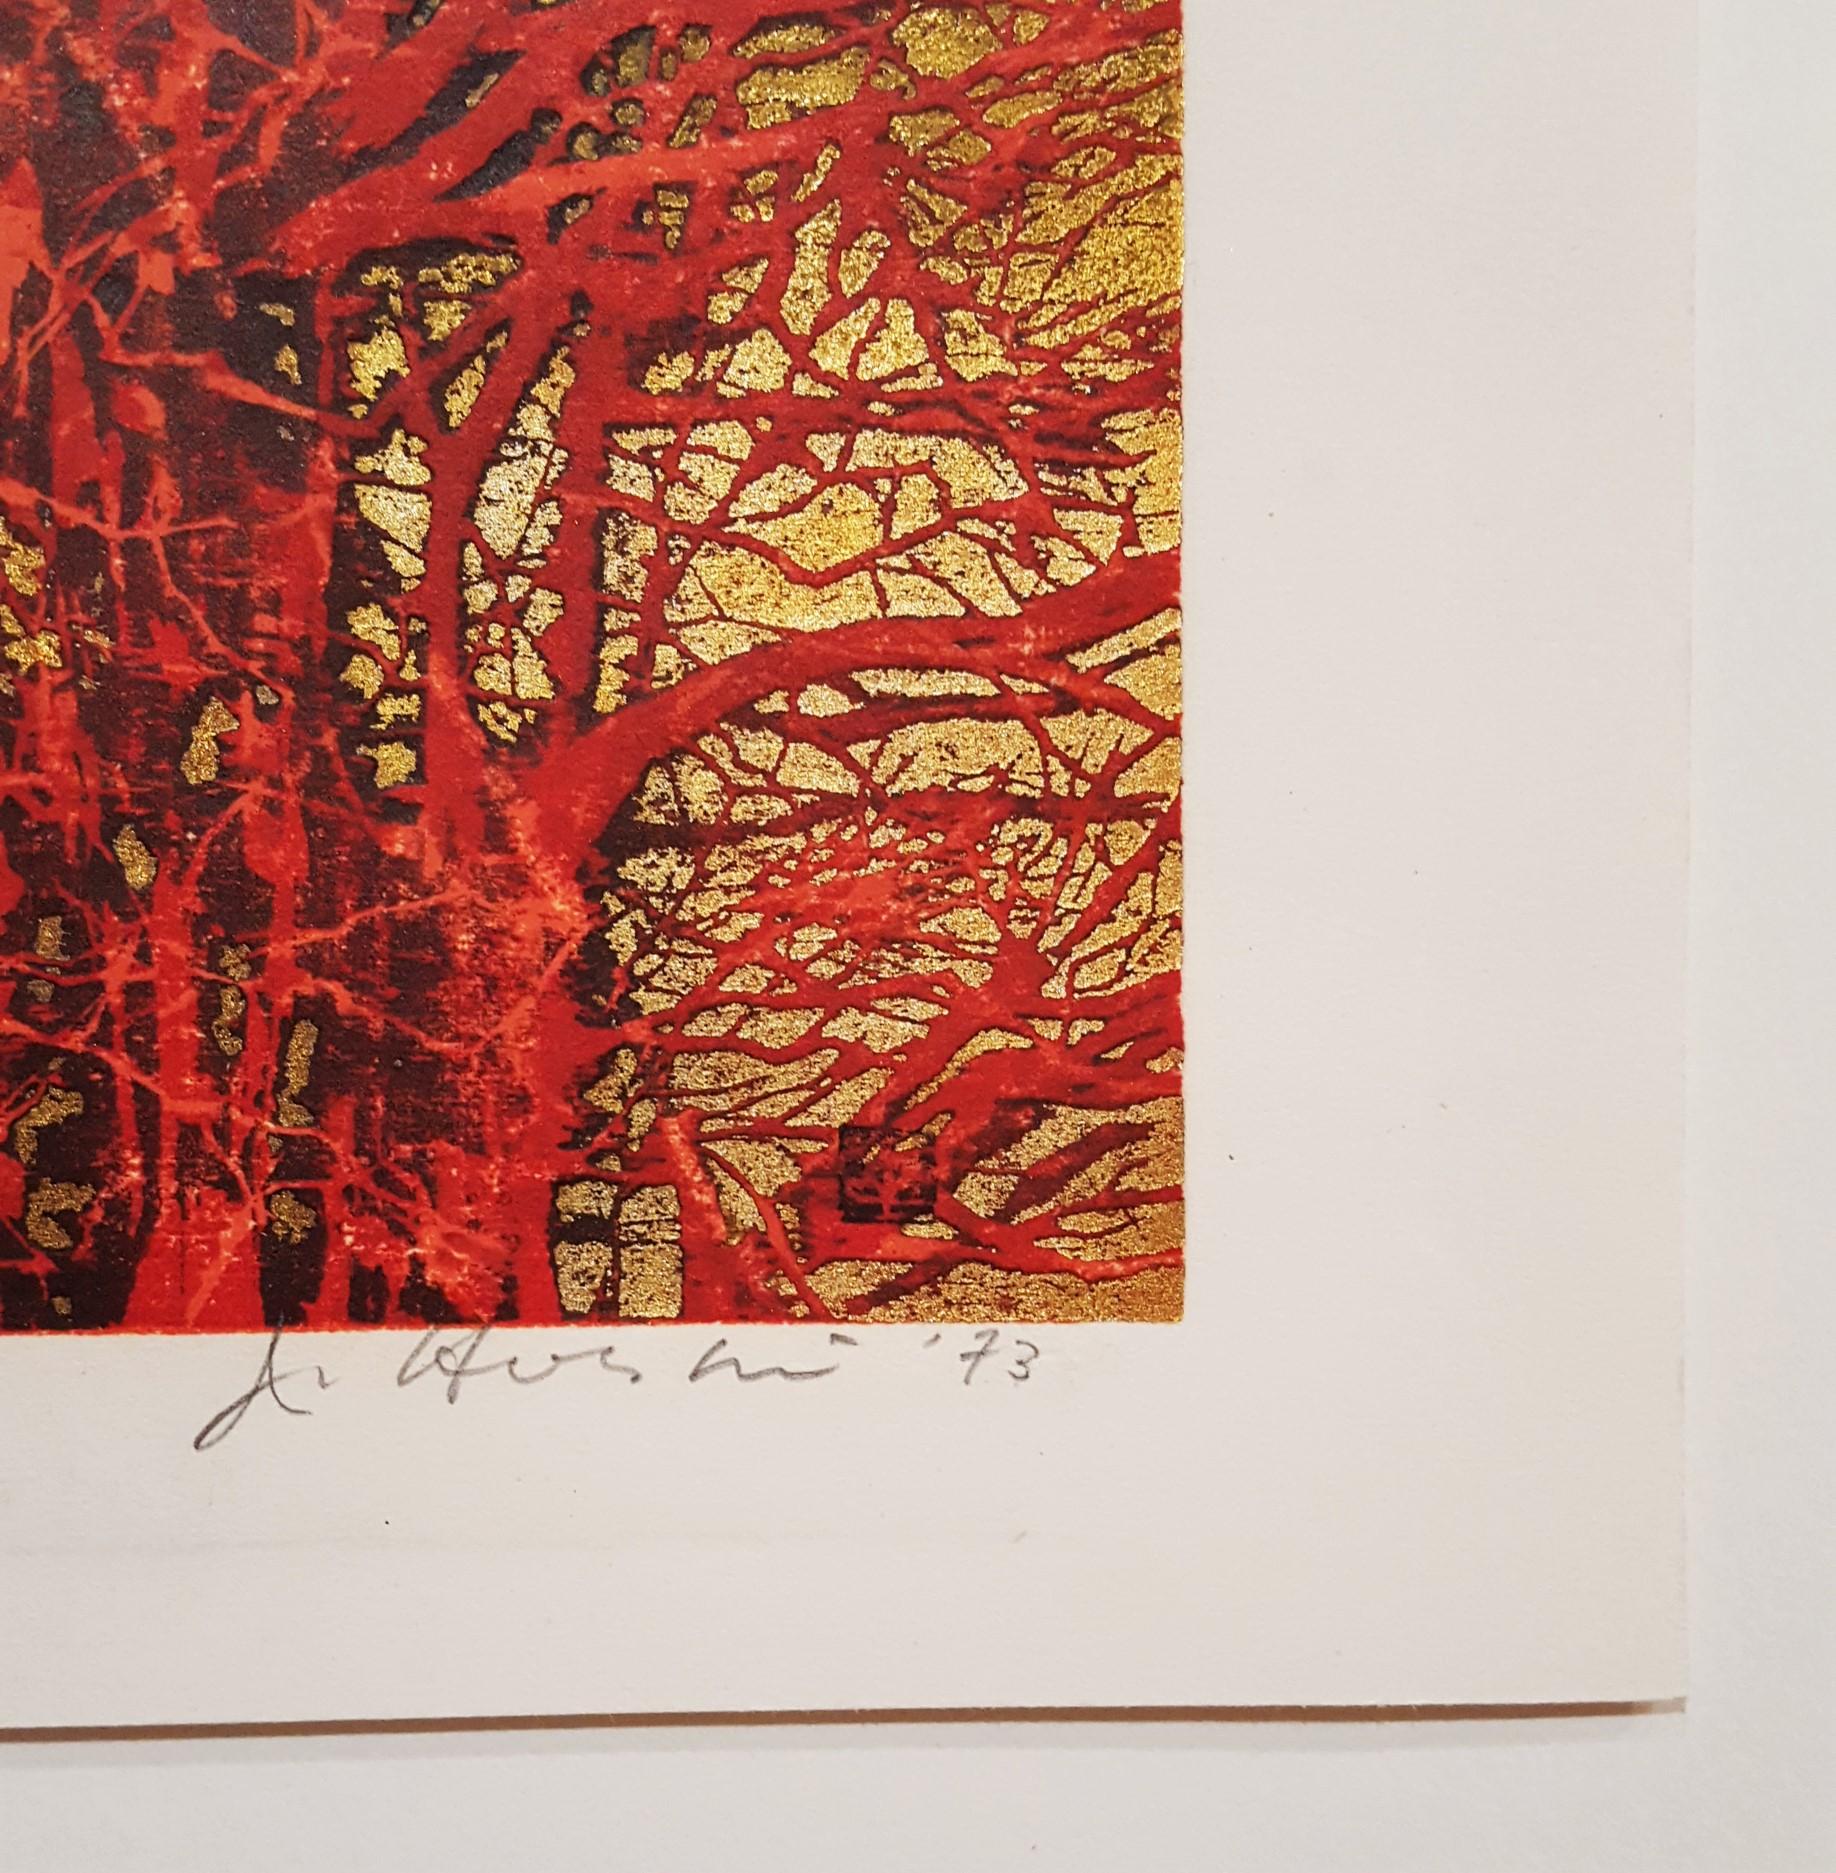 Red Branches (Akai eda) - Gold Landscape Print by Joichi Hoshi